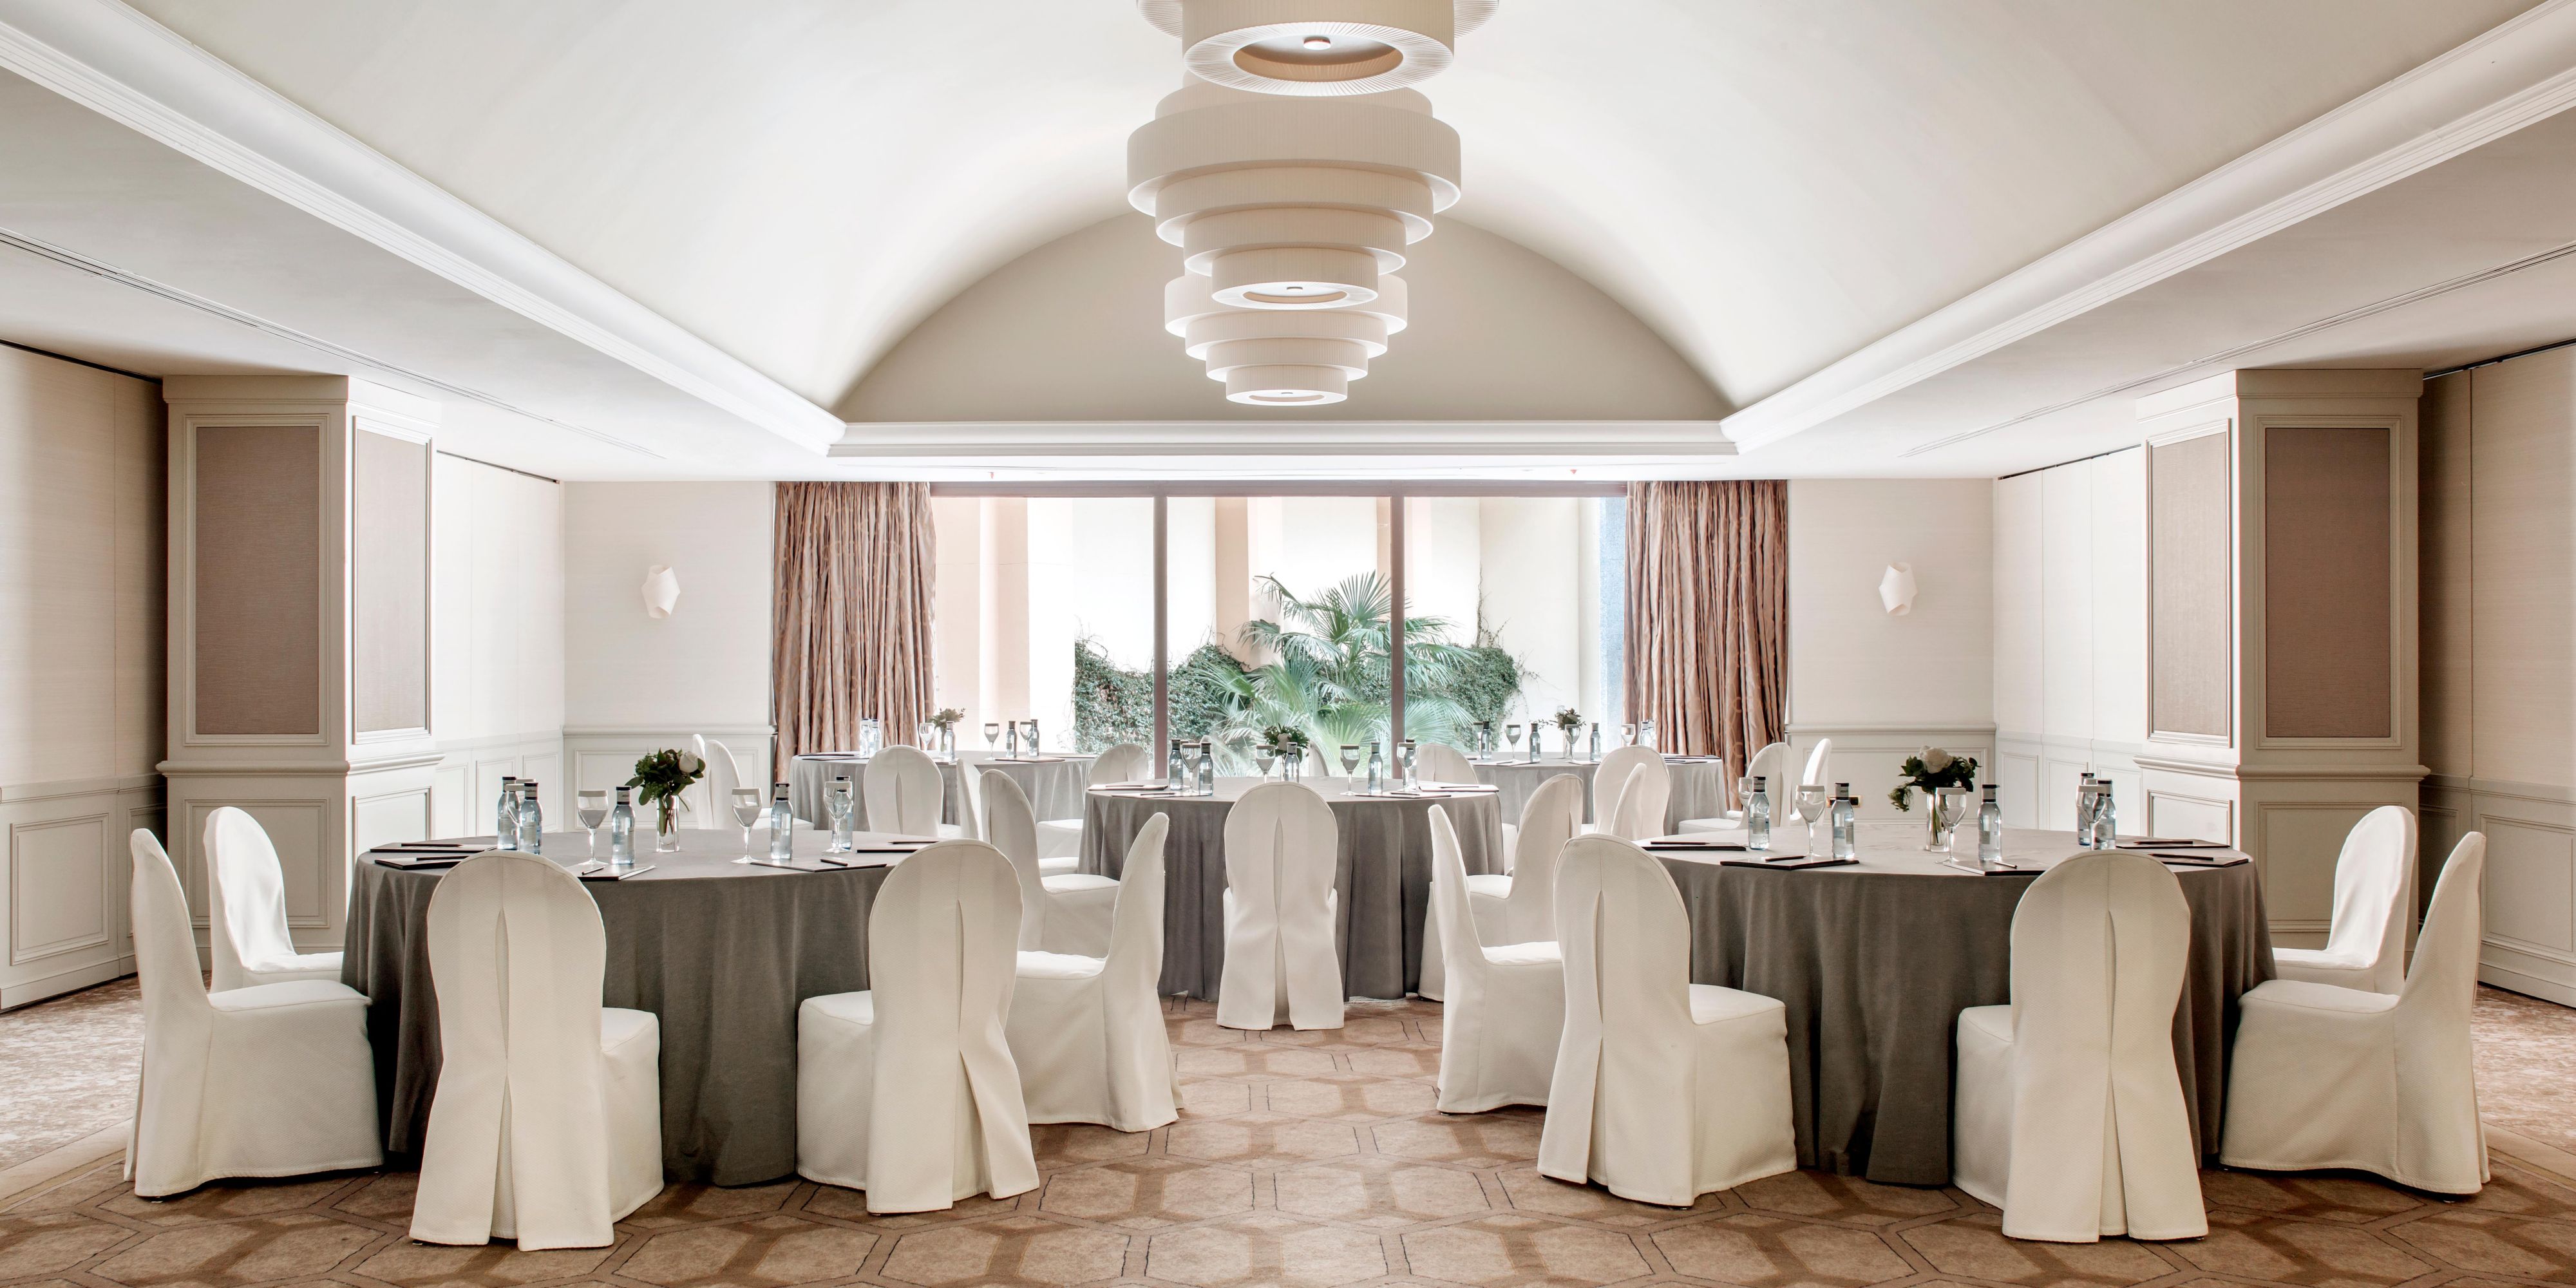 Plan your event at InterContinental Madrid, with nearly 70 years of experience in the business. We're proud to have been awarded “Best MICE Hotel in Spain" in 2016 and 2020 and “Best Business Hotel in Spain" in the 2014 and 2015 World Travel Awards.